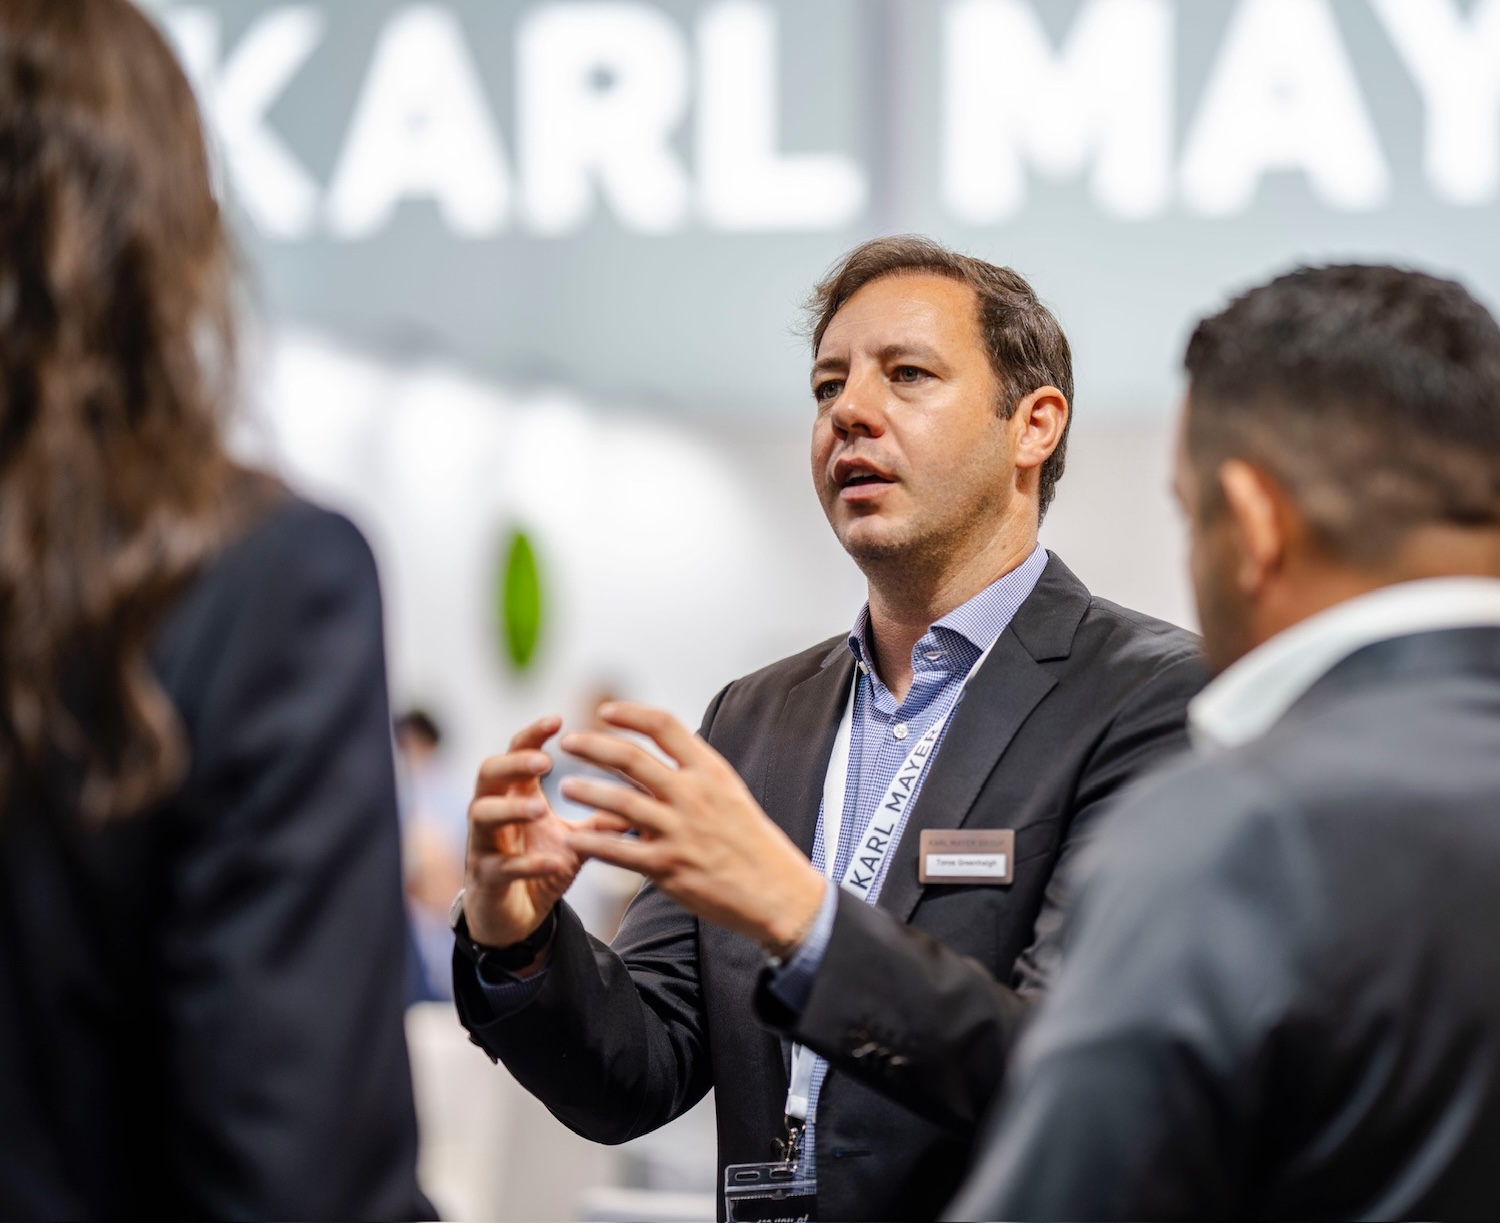 Karl Mayer’s Toros Greenhalgh in discussion with customers. © Karl Mayer Group